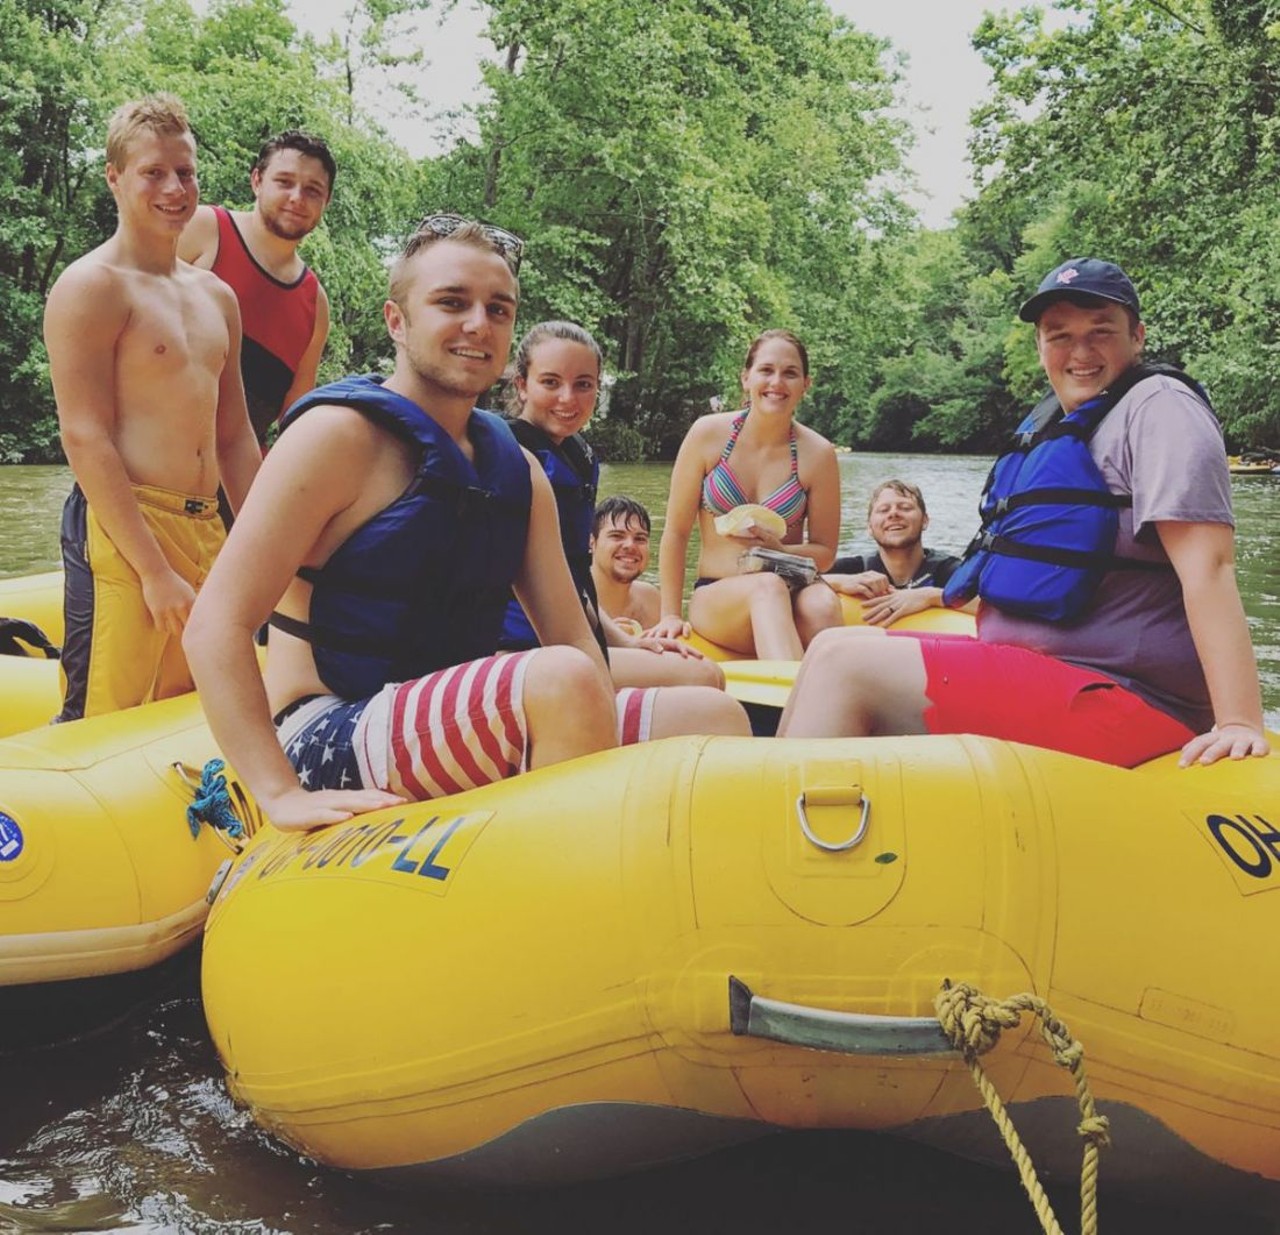  Mohican River
3058 OH-3, Loudonville
For only $15, tubers, friends and family can float through the Mohican River in Loudonville with Mohican Adventures company. Expect the float to last four to five hours, depending on the amount of beers you brought in your cooler.
Photo via @mrs_melley_haught/Instagram